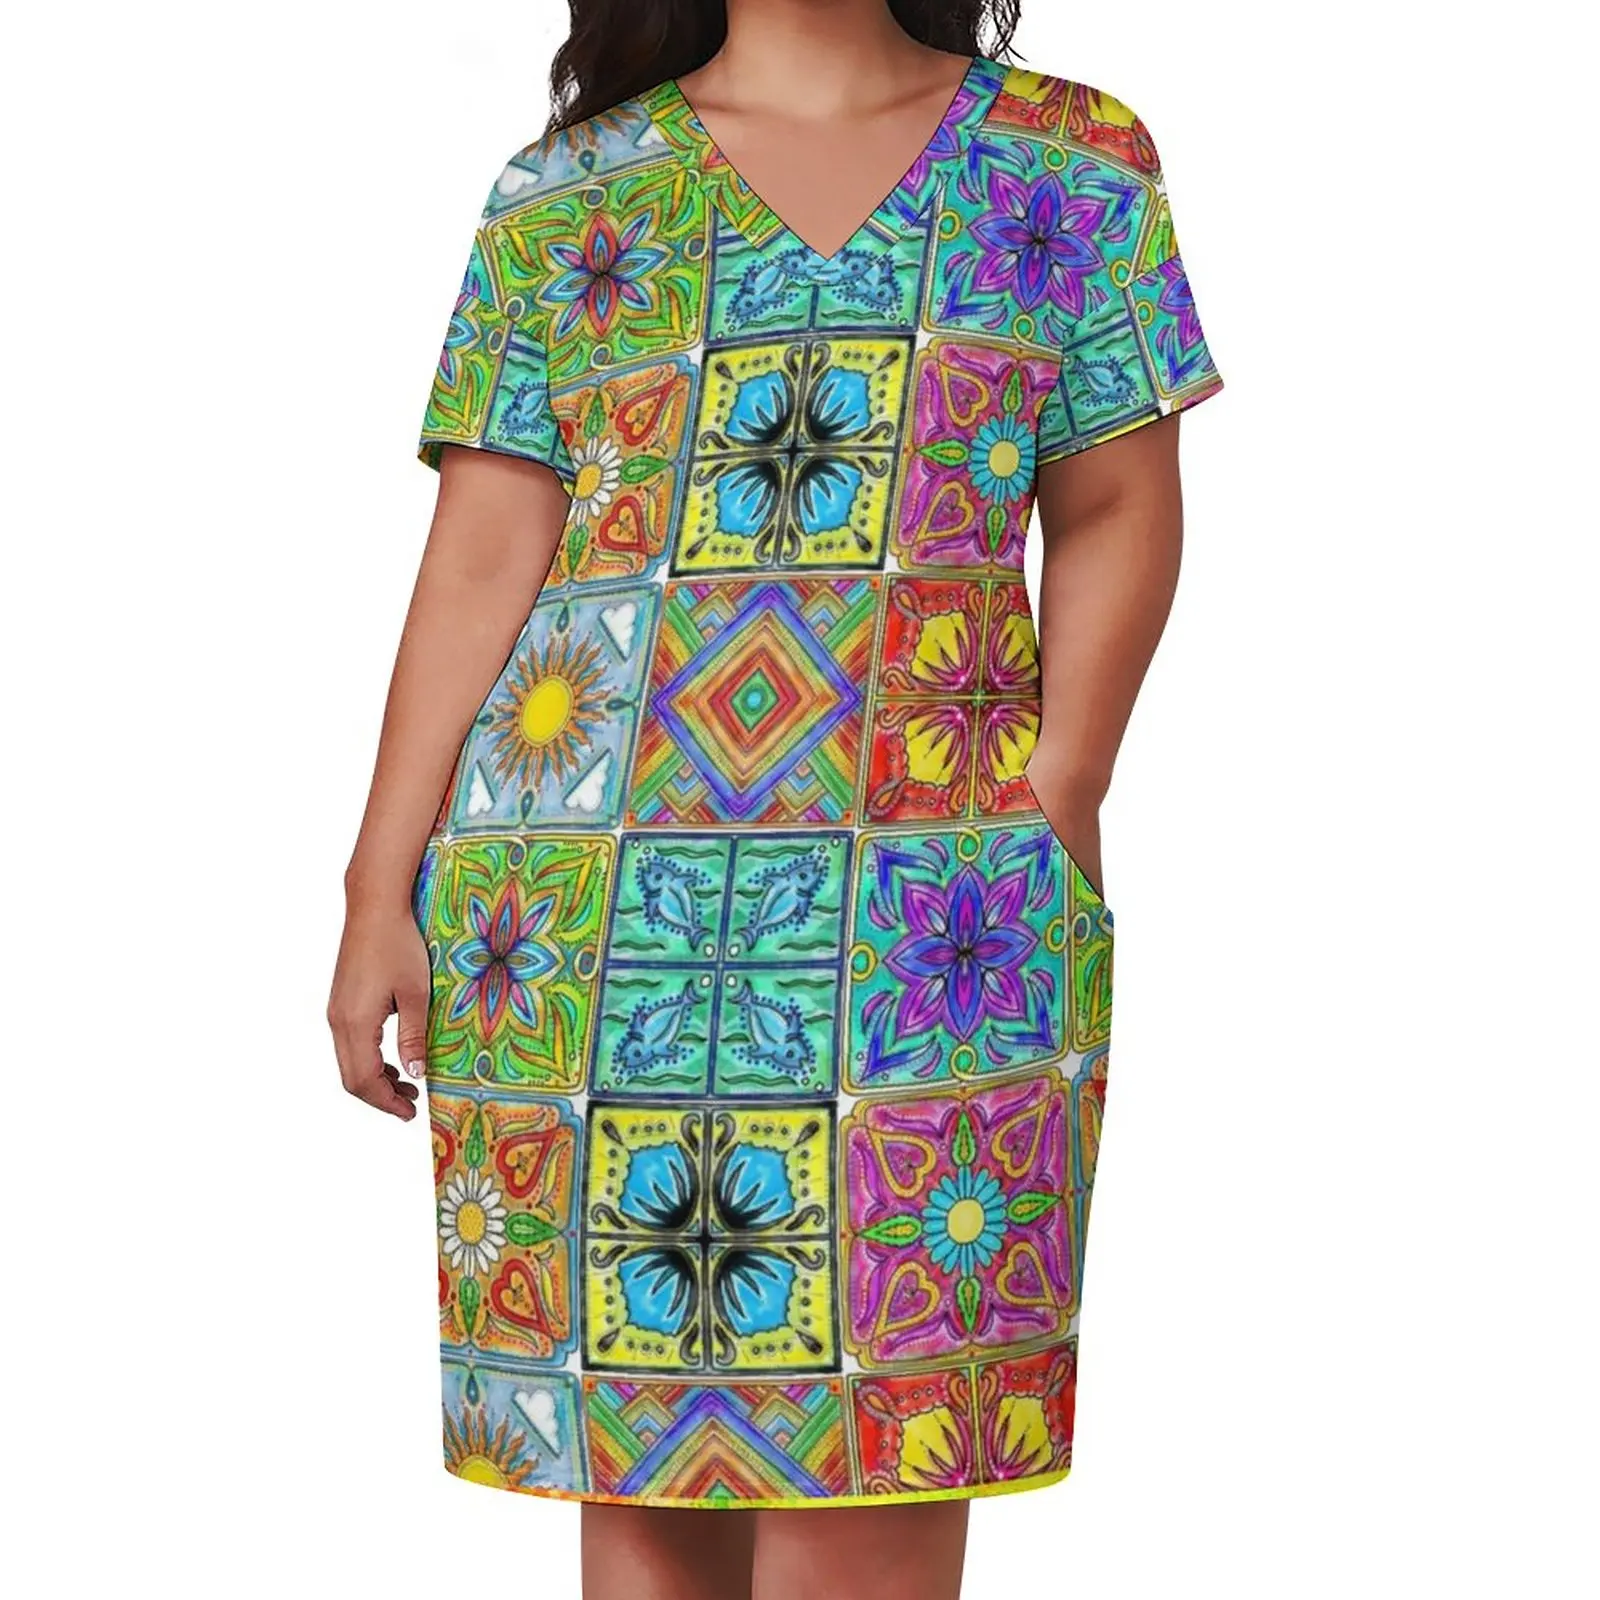 Vintage Patchwork Dress V Neck Colorful Spanish Tile Stylish Dresses Streetwear Graphic Casual Dress With Pockets Plus Size 5XL